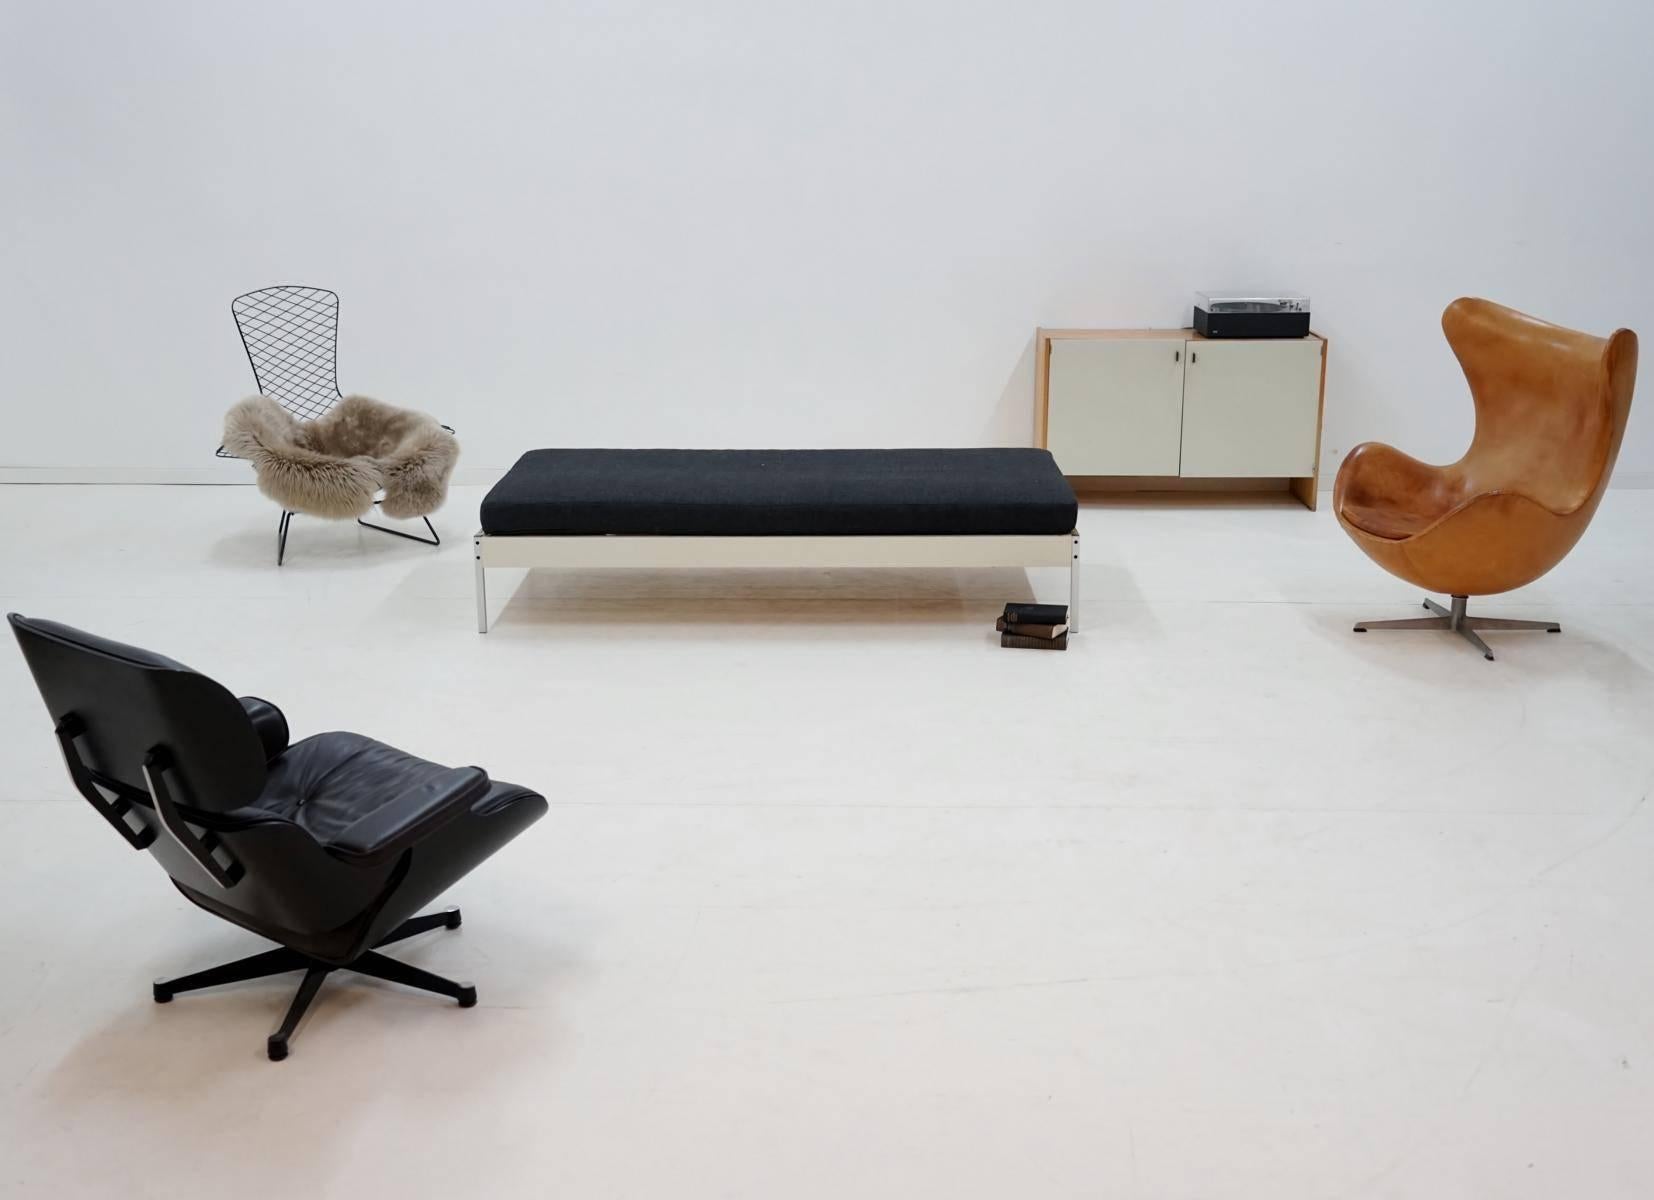 Daybed canapé couch by Dieter Rams 1950s bedframe

Design: Dieter Rams, 1957
Absolute rarity. Hard to find!